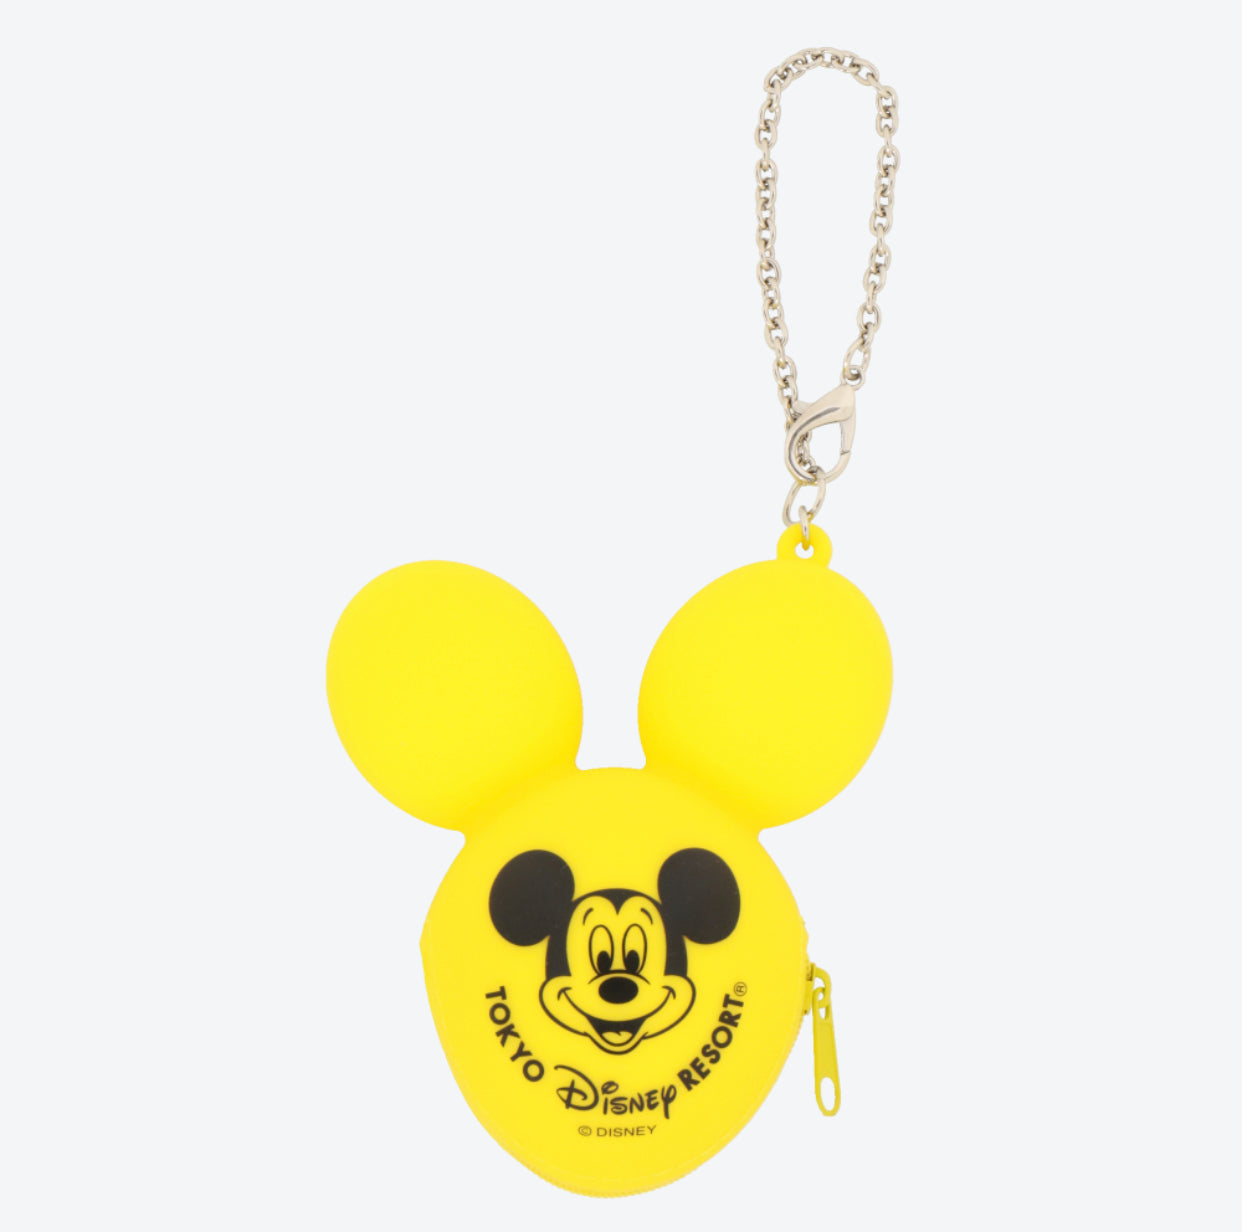 PERIMADE & Co. Snowflake Mickey Mouse Crystal Keychain, Yellow